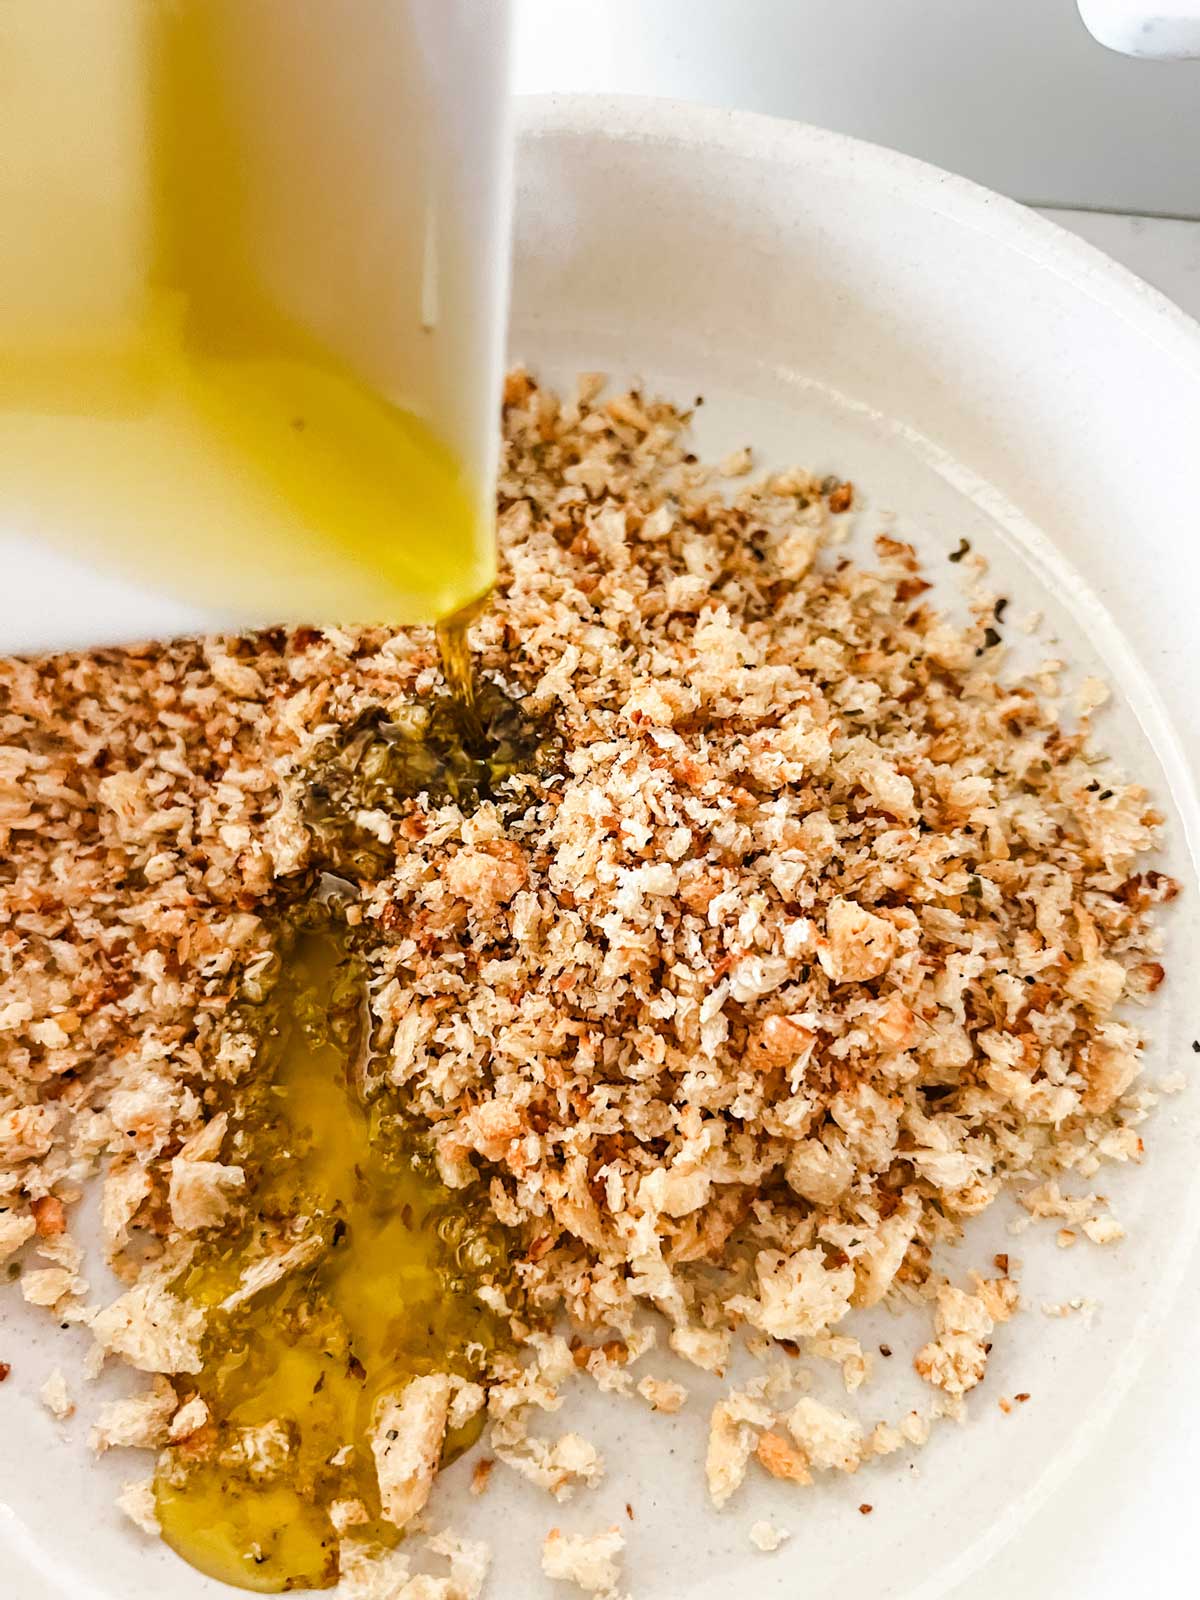 Oil being mixed with breadcrumbs.